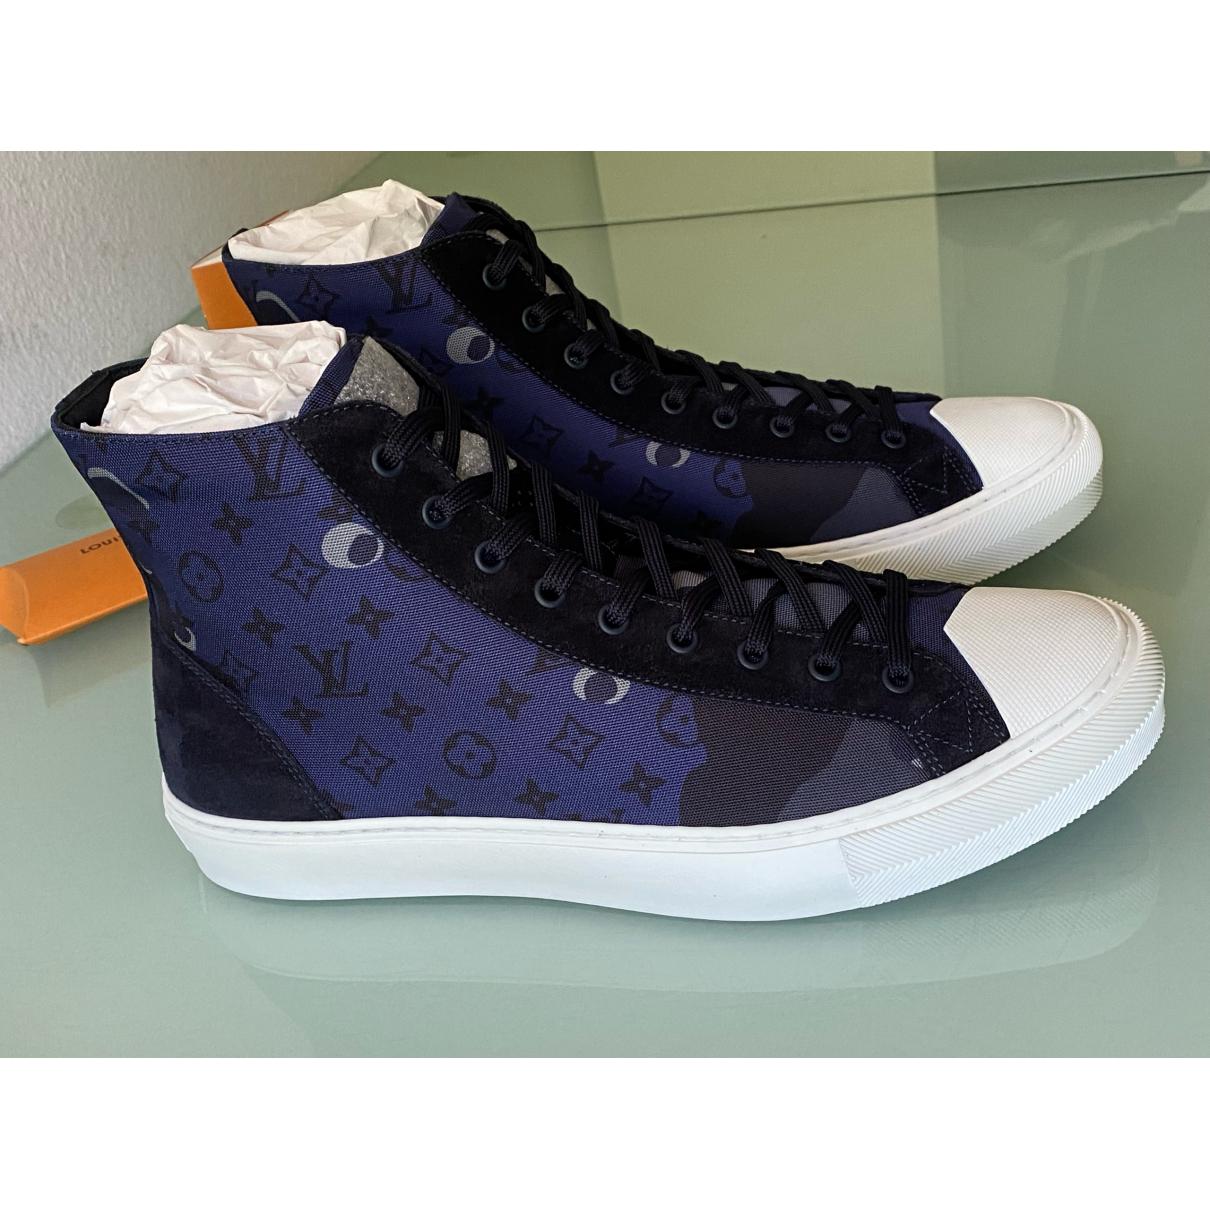 Tattoo cloth high trainers Louis Vuitton Navy size 9.5 UK in Fabric -  18239207